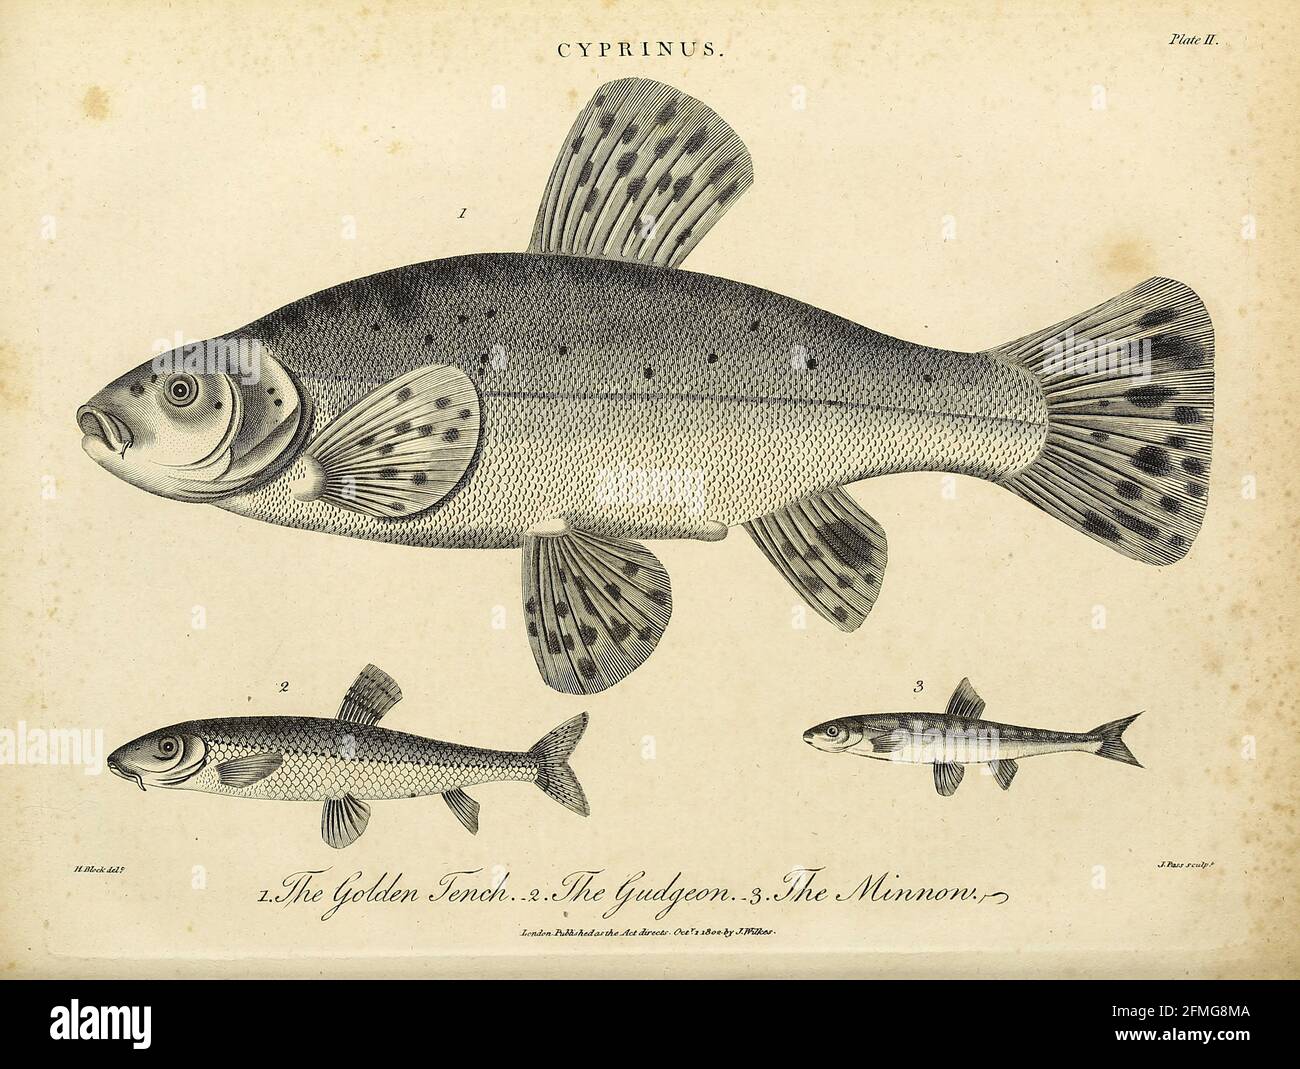 Cyprinus 1. Golden Tench [Tinca tinca] 2. Gudgeon 3. Minnon Copperplate engraving From the Encyclopaedia Londinensis or, Universal dictionary of arts, sciences, and literature; Volume V;  Edited by Wilkes, John. Published in London in 1810 Stock Photo